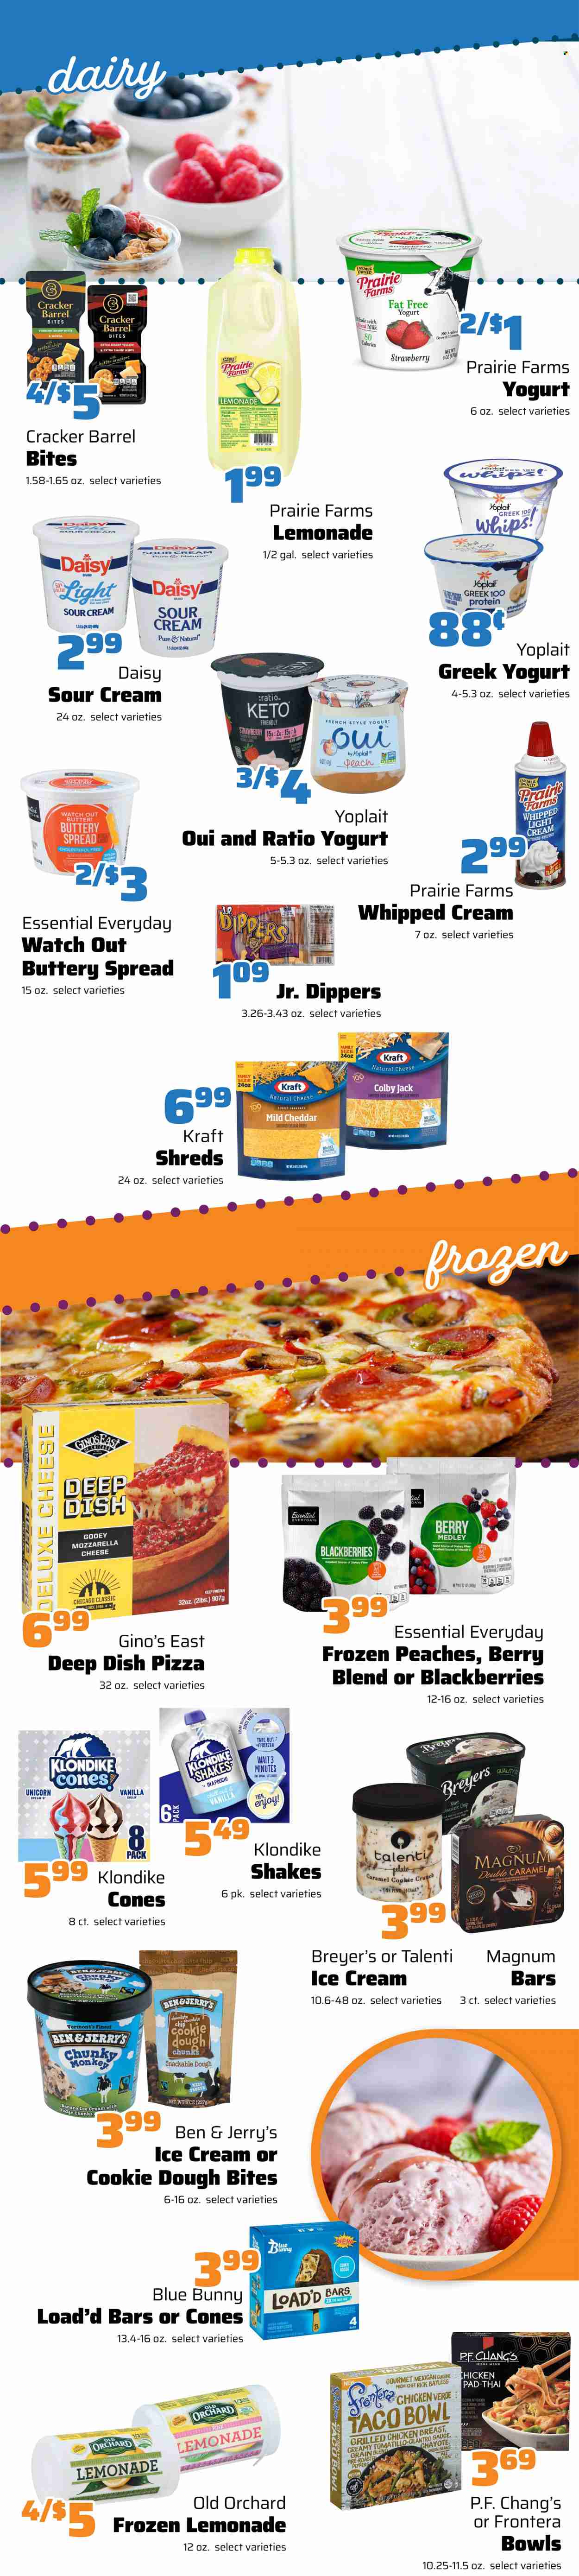 thumbnail - County Market Flyer - 05/18/2022 - 05/24/2022 - Sales products - pretzels, beans, carrots, green beans, tomatillo, peppers, blackberries, blueberries, chayote, pizza, Kraft®, Colby cheese, gouda, mild cheddar, Monterey Jack cheese, greek yoghurt, yoghurt, Yoplait, milk, shake, buttery spread, sour cream, whipped cream, dip, Magnum, ice cream, ice cream bars, Ben & Jerry's, Talenti Gelato, gelato, Blue Bunny, cookie dough, fudge, crackers, cilantro, walnuts, chicken breasts, lemons, peaches. Page 1.